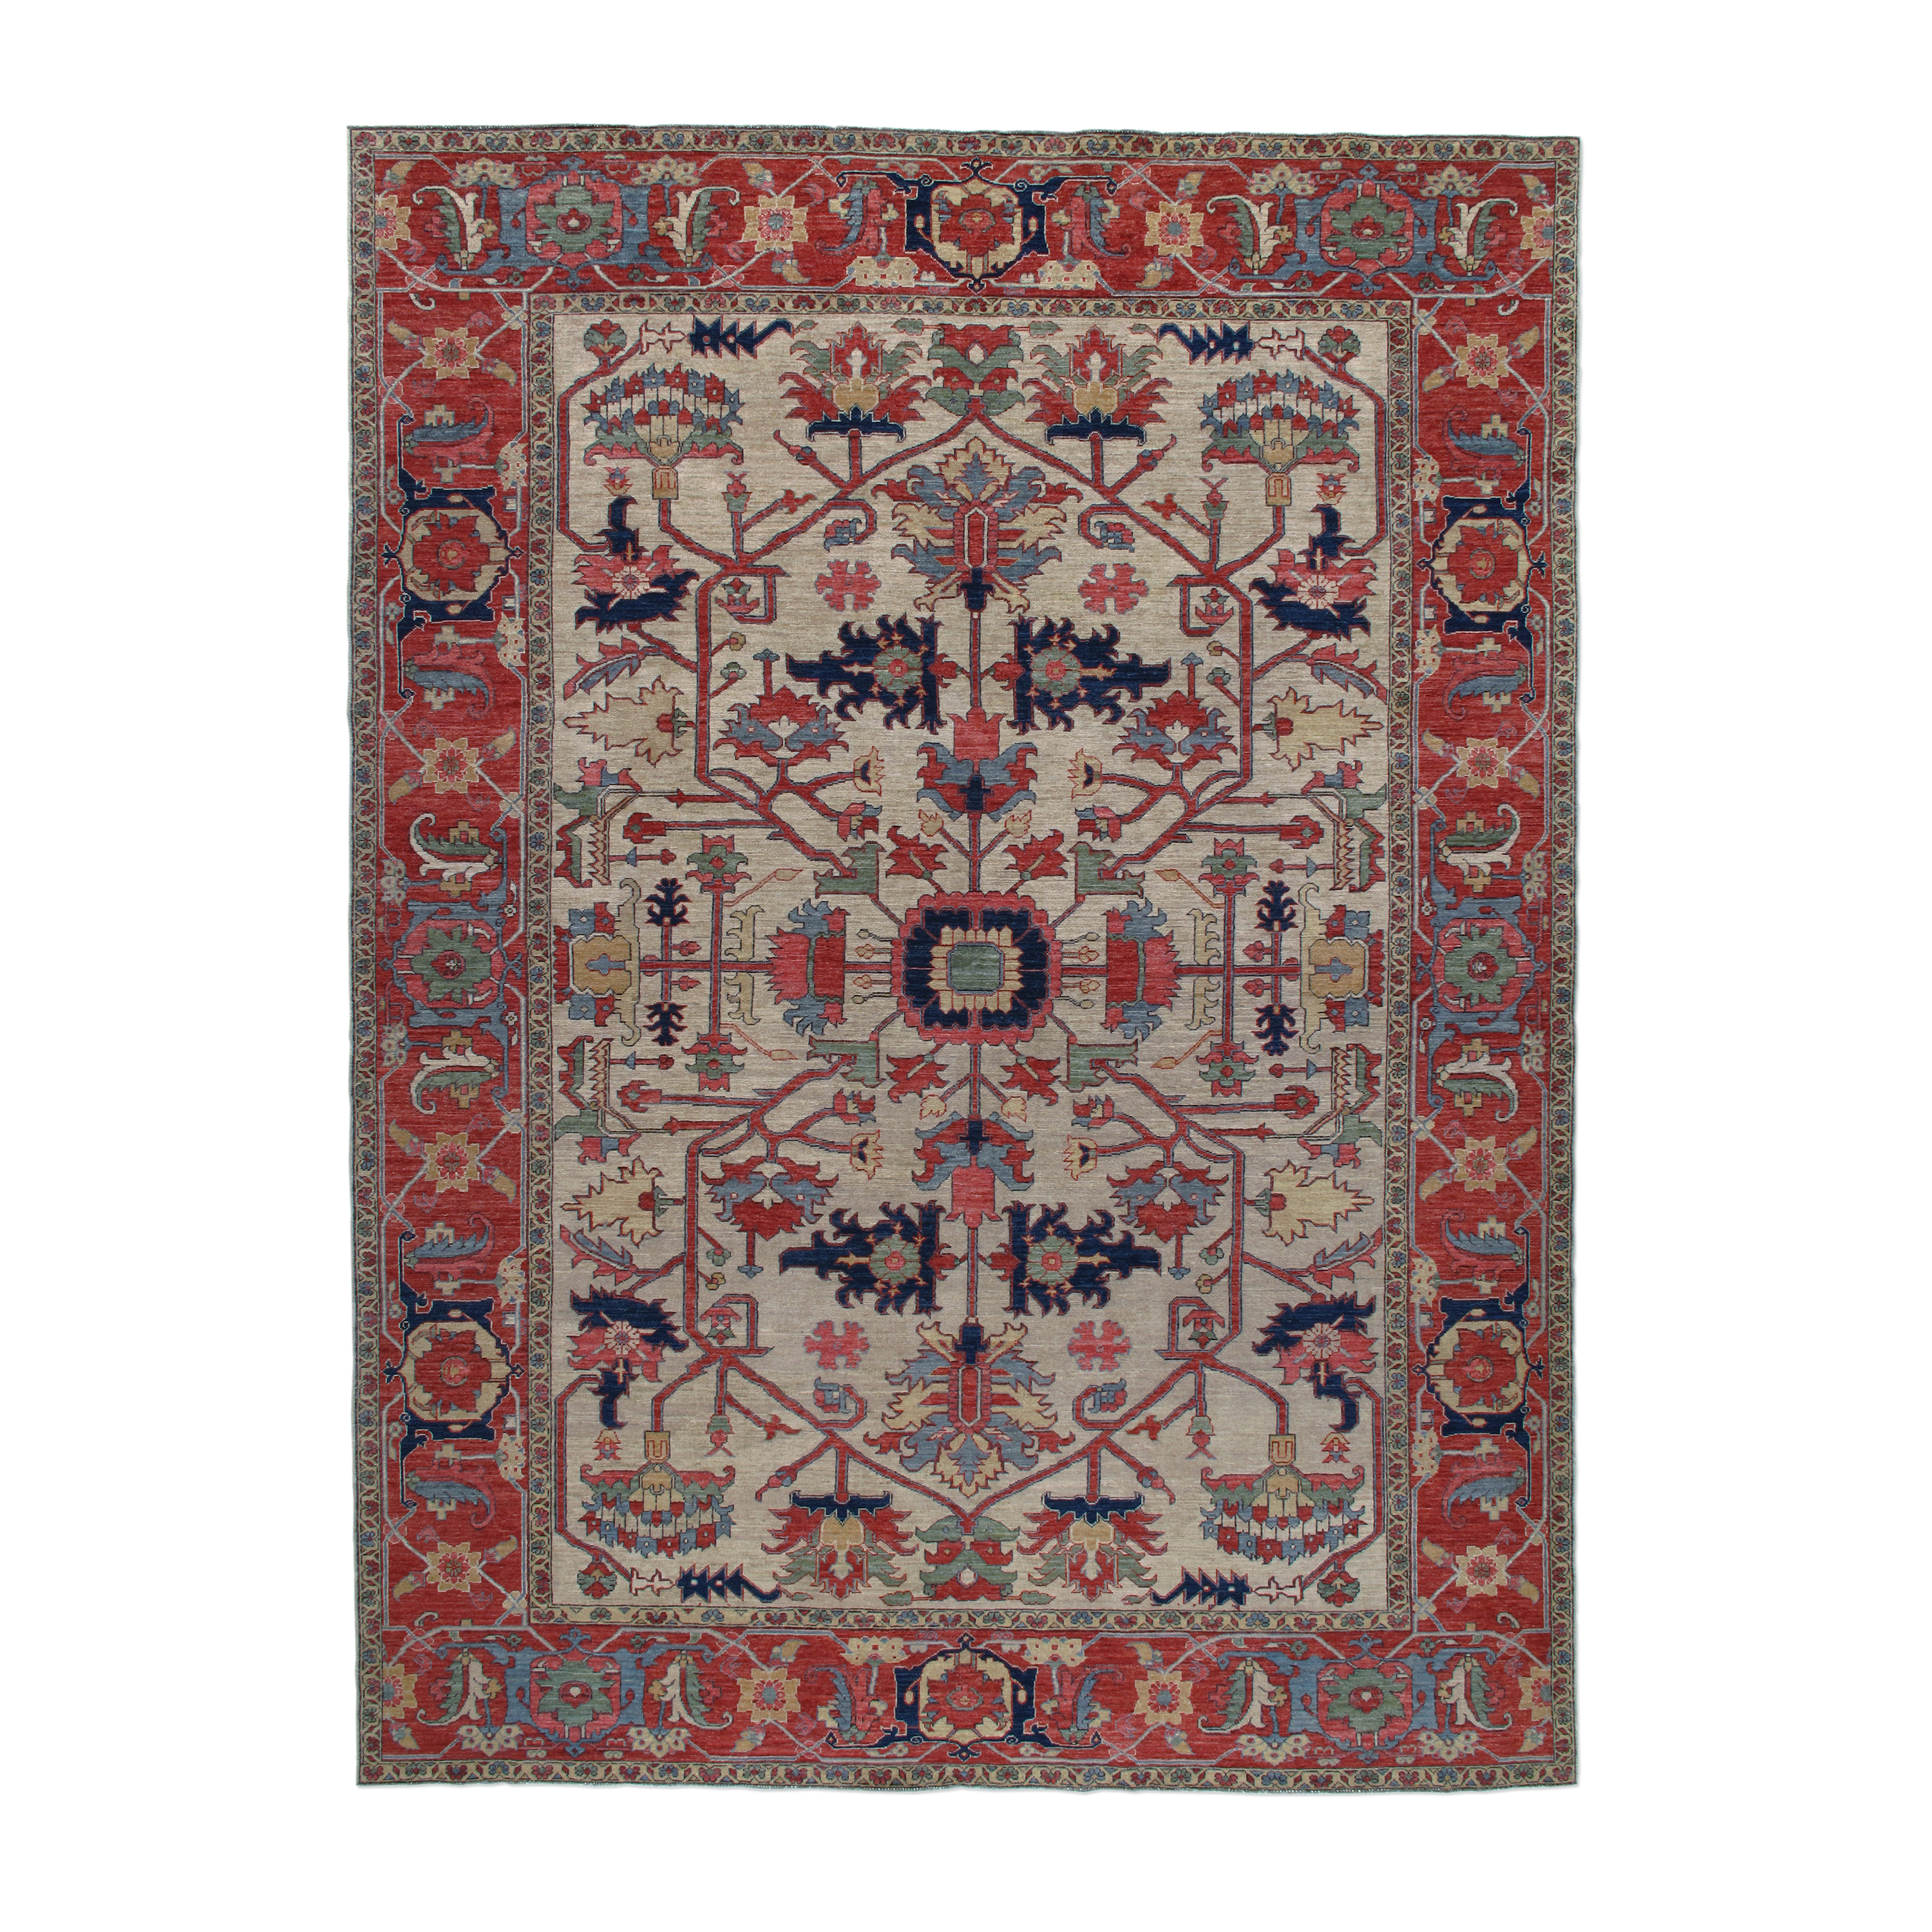 This Heriz rug Hand-knotted and crafted with hand-spun wool. 